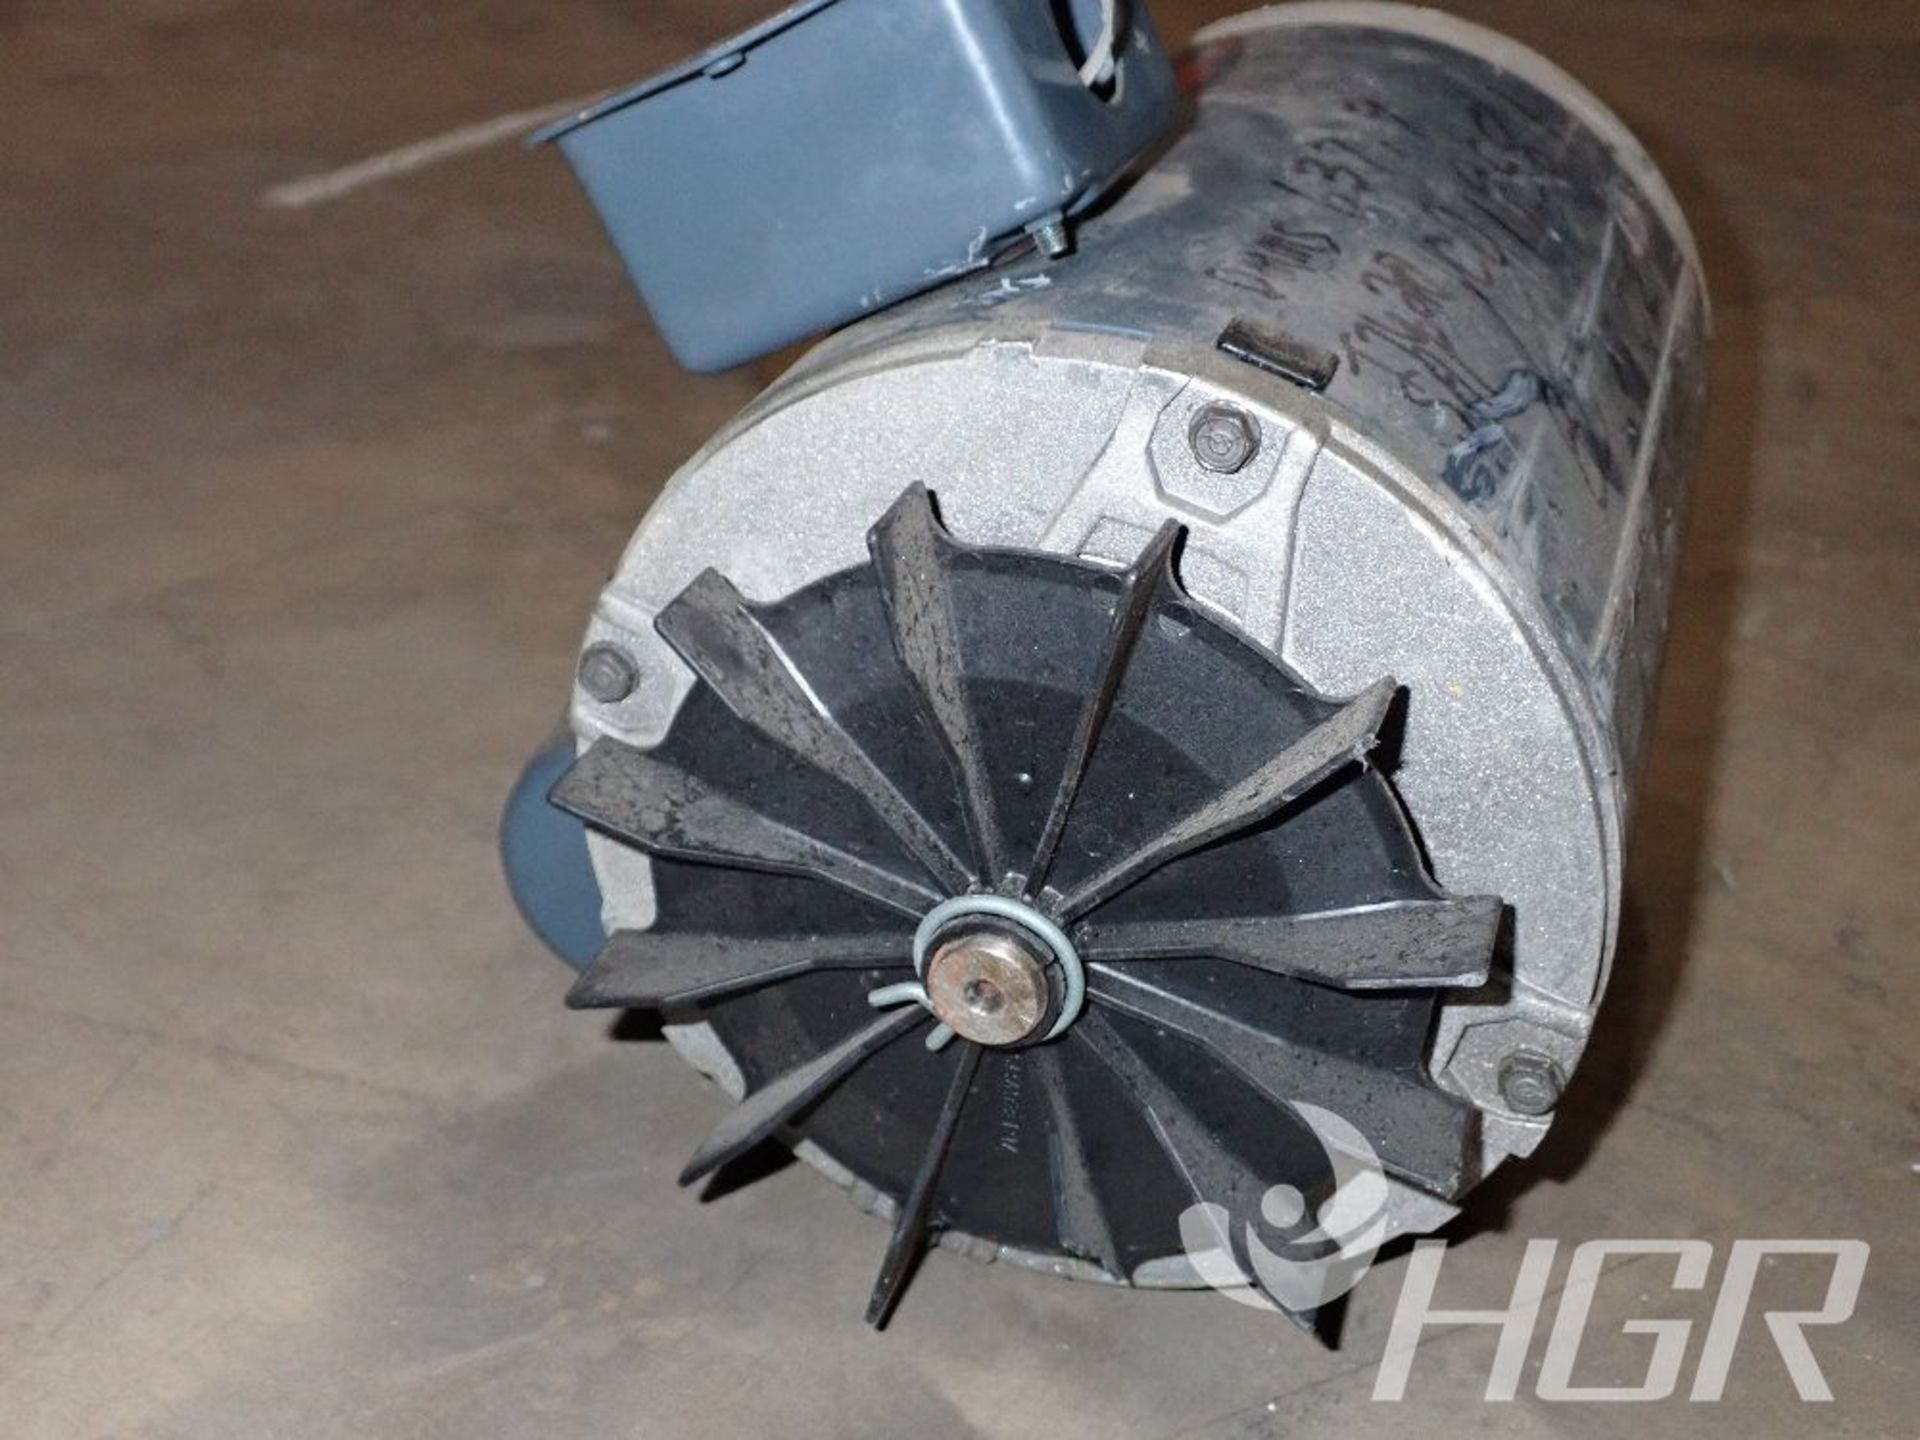 GE MOTOR, Model 5K949TN0035, Date: n/a; s/n n/a, Approx. Capacity: 1HP, Power: 1/60/115/230, - Image 6 of 6